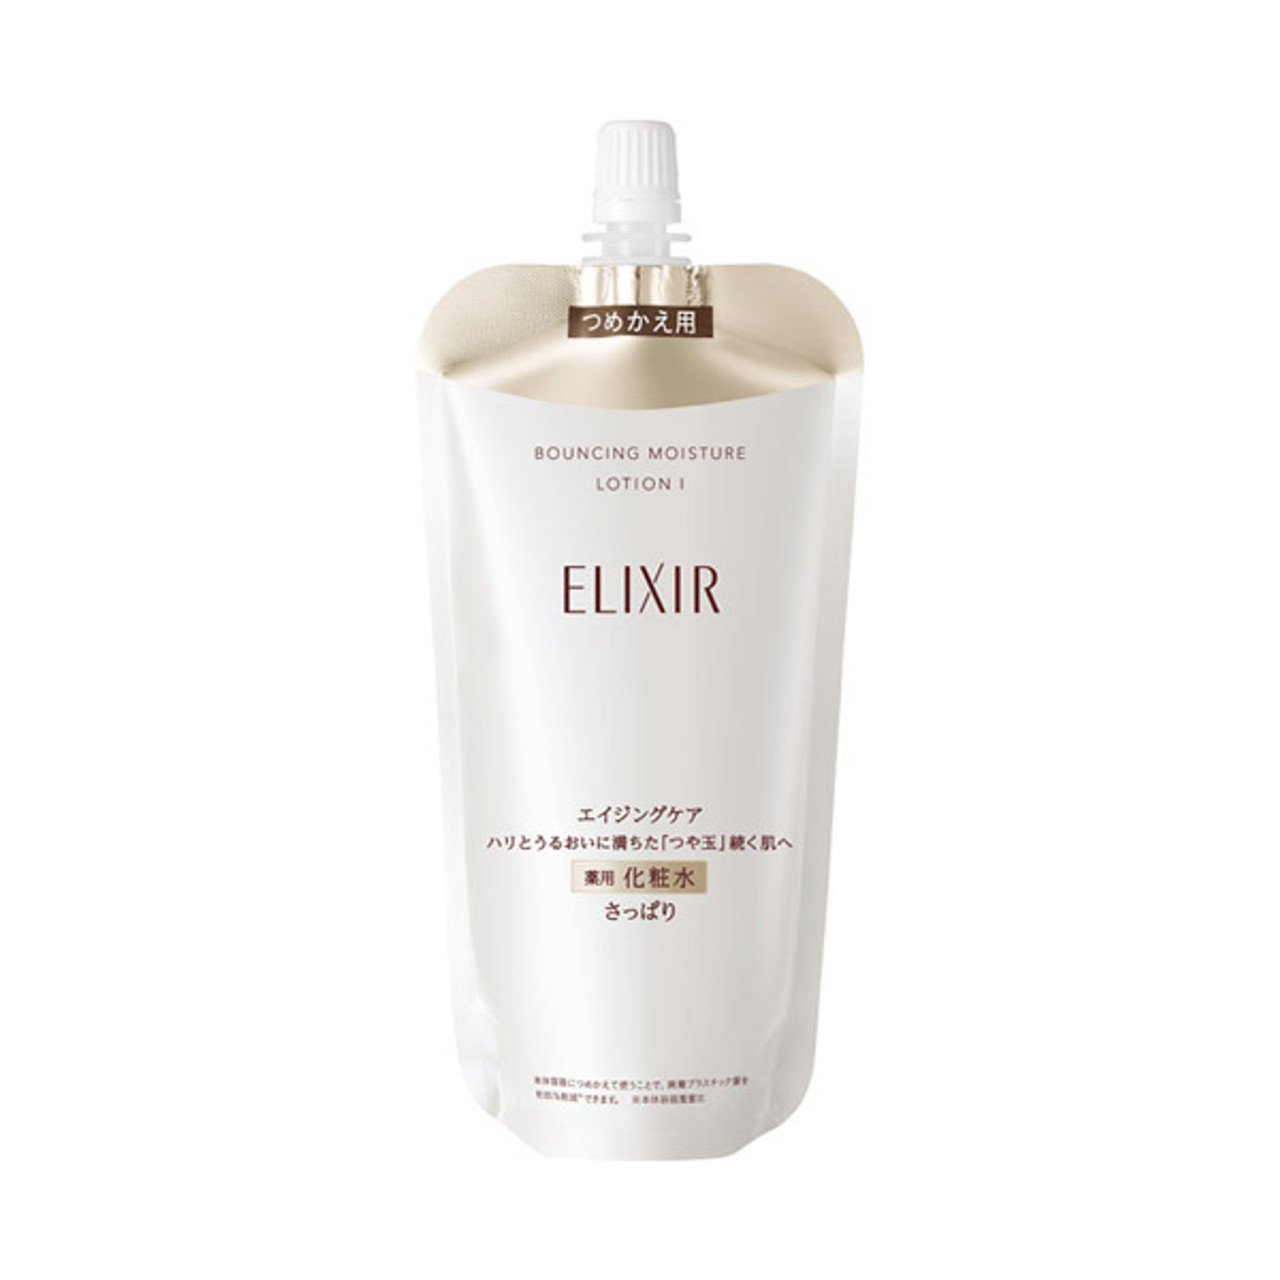 Elixir Skincare, The Key to Radiant, Healthy Skin